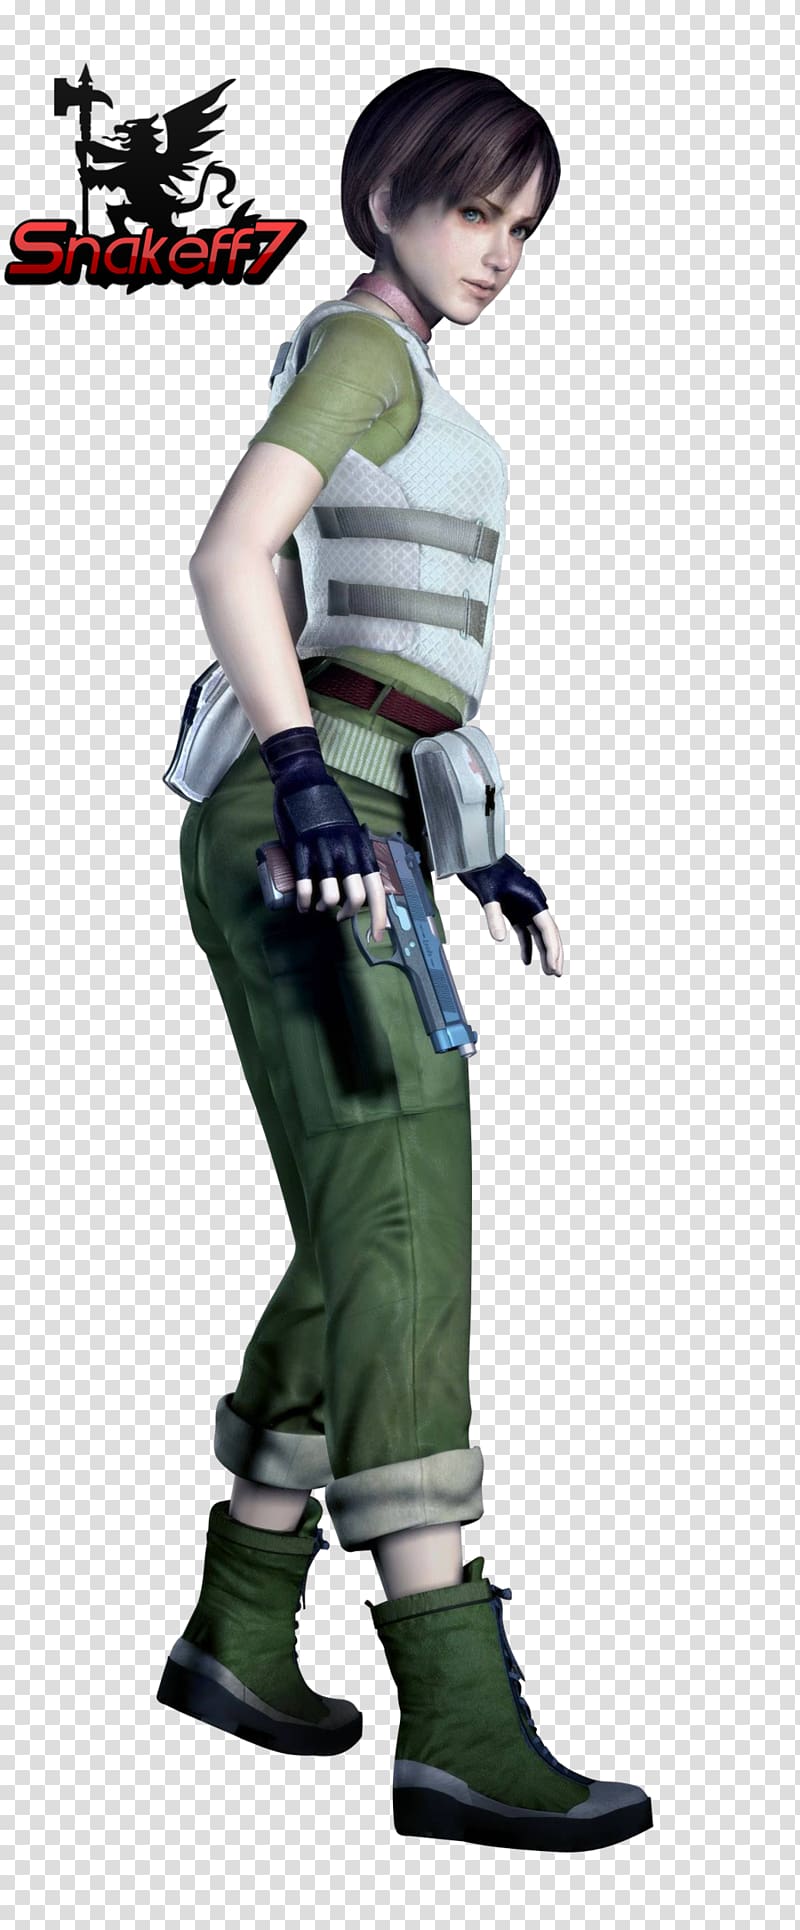 Resident Evil Zero Character Costume Fiction, others transparent background PNG clipart